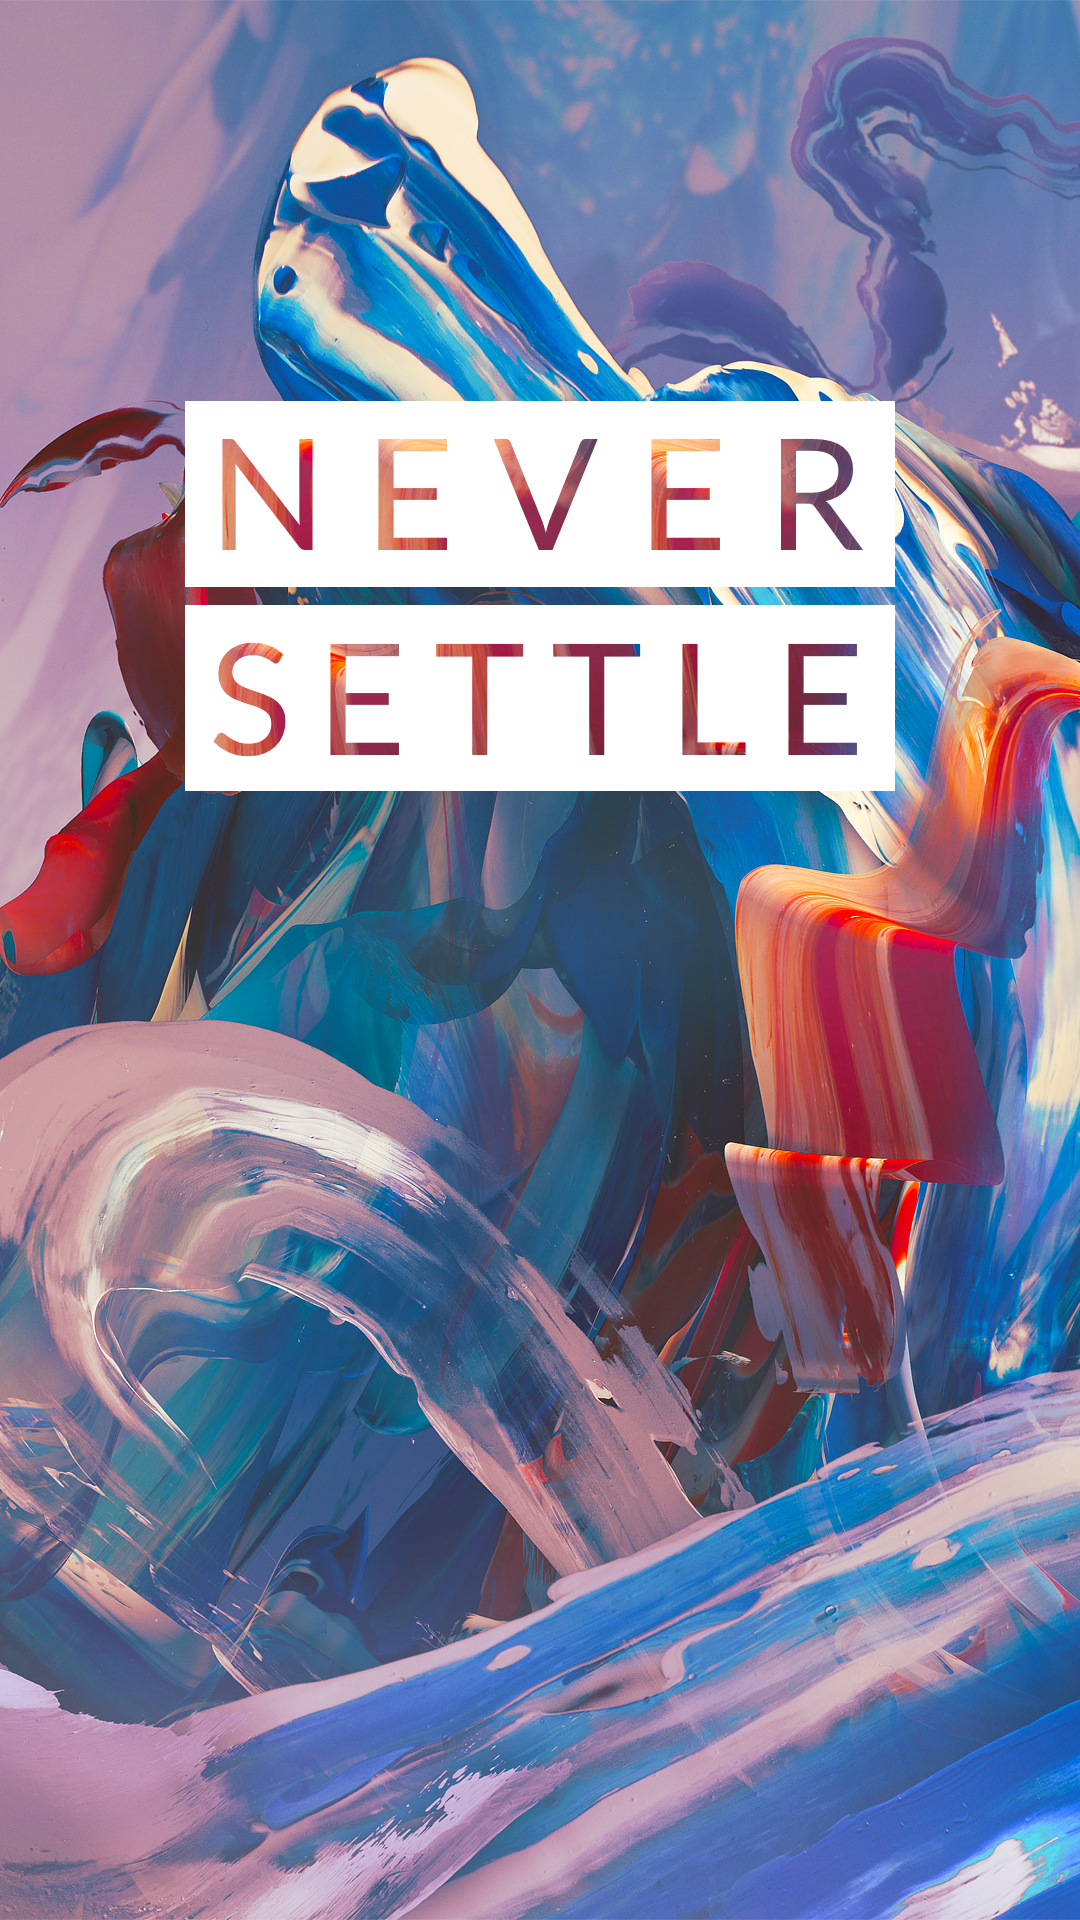 Download OnePlus 3 %22Never Settle%22 wallpaper